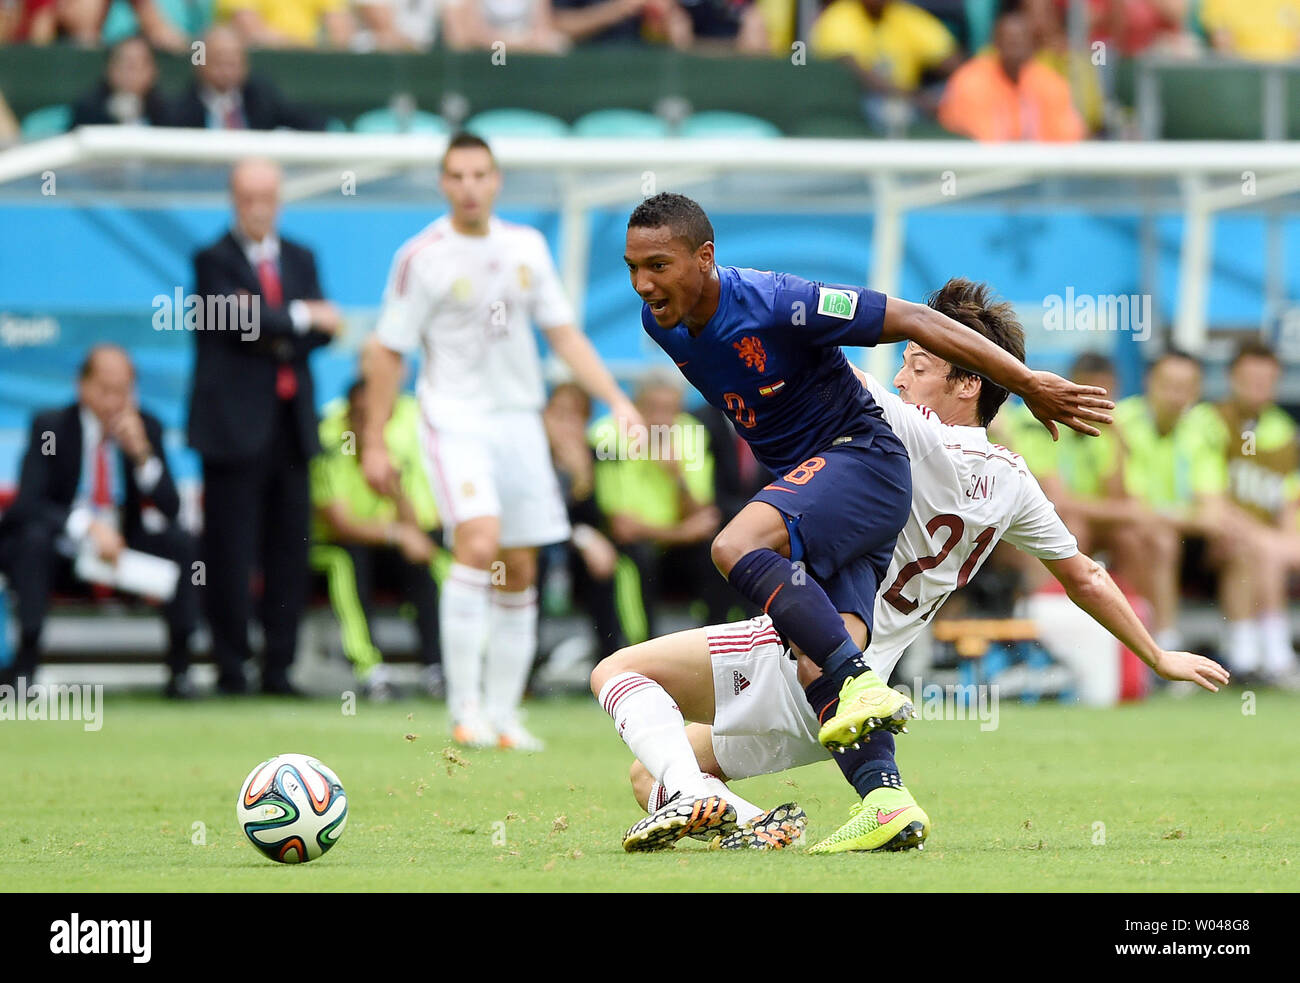 David Silva of Spain competes with Jonathan De Guzman (L) of the Netherlands during the 2014 FIFA World Cup Group B match at the Arena Fonte Nova in Salvador, Brazil on June 13, 2014. UPI/Chris Brunskill Stock Photo